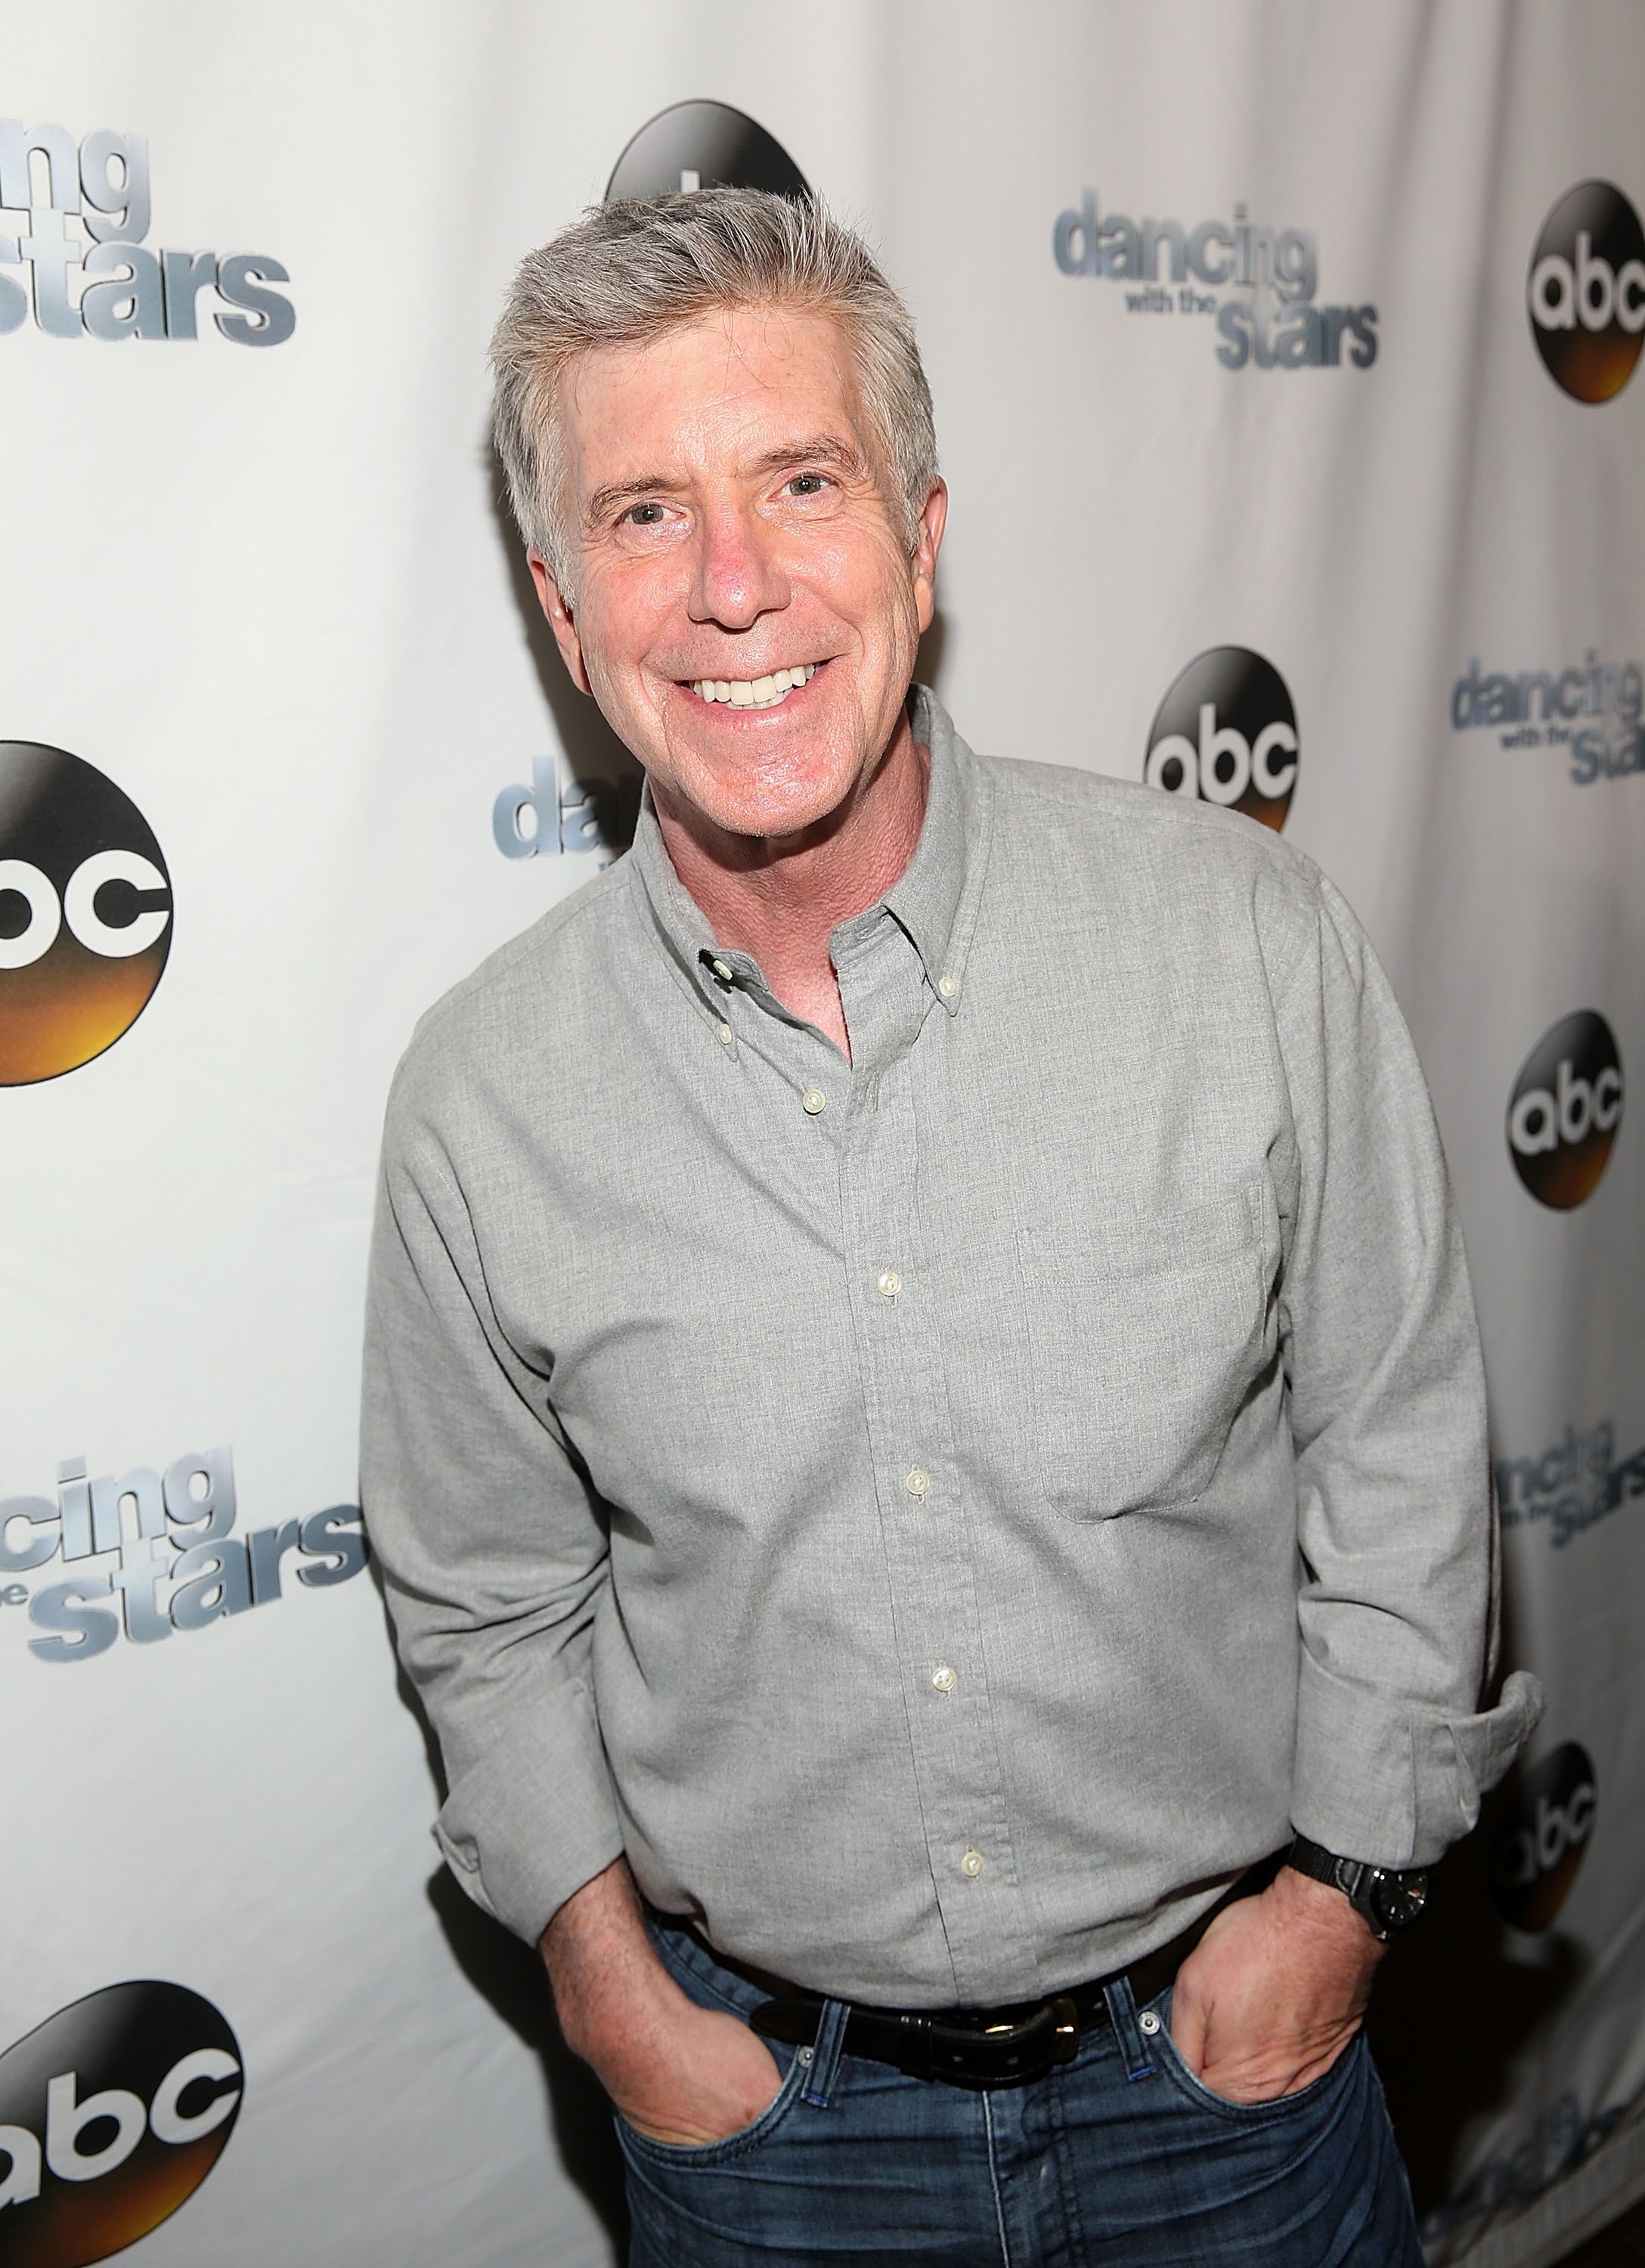 Tom Bergeron at the "Dancing With The Stars" semi-finals episode celebration at Mixology Grill and Lounge on May 16, 2016, in Los Angeles, California | Photo: Jesse Grant/Getty Images